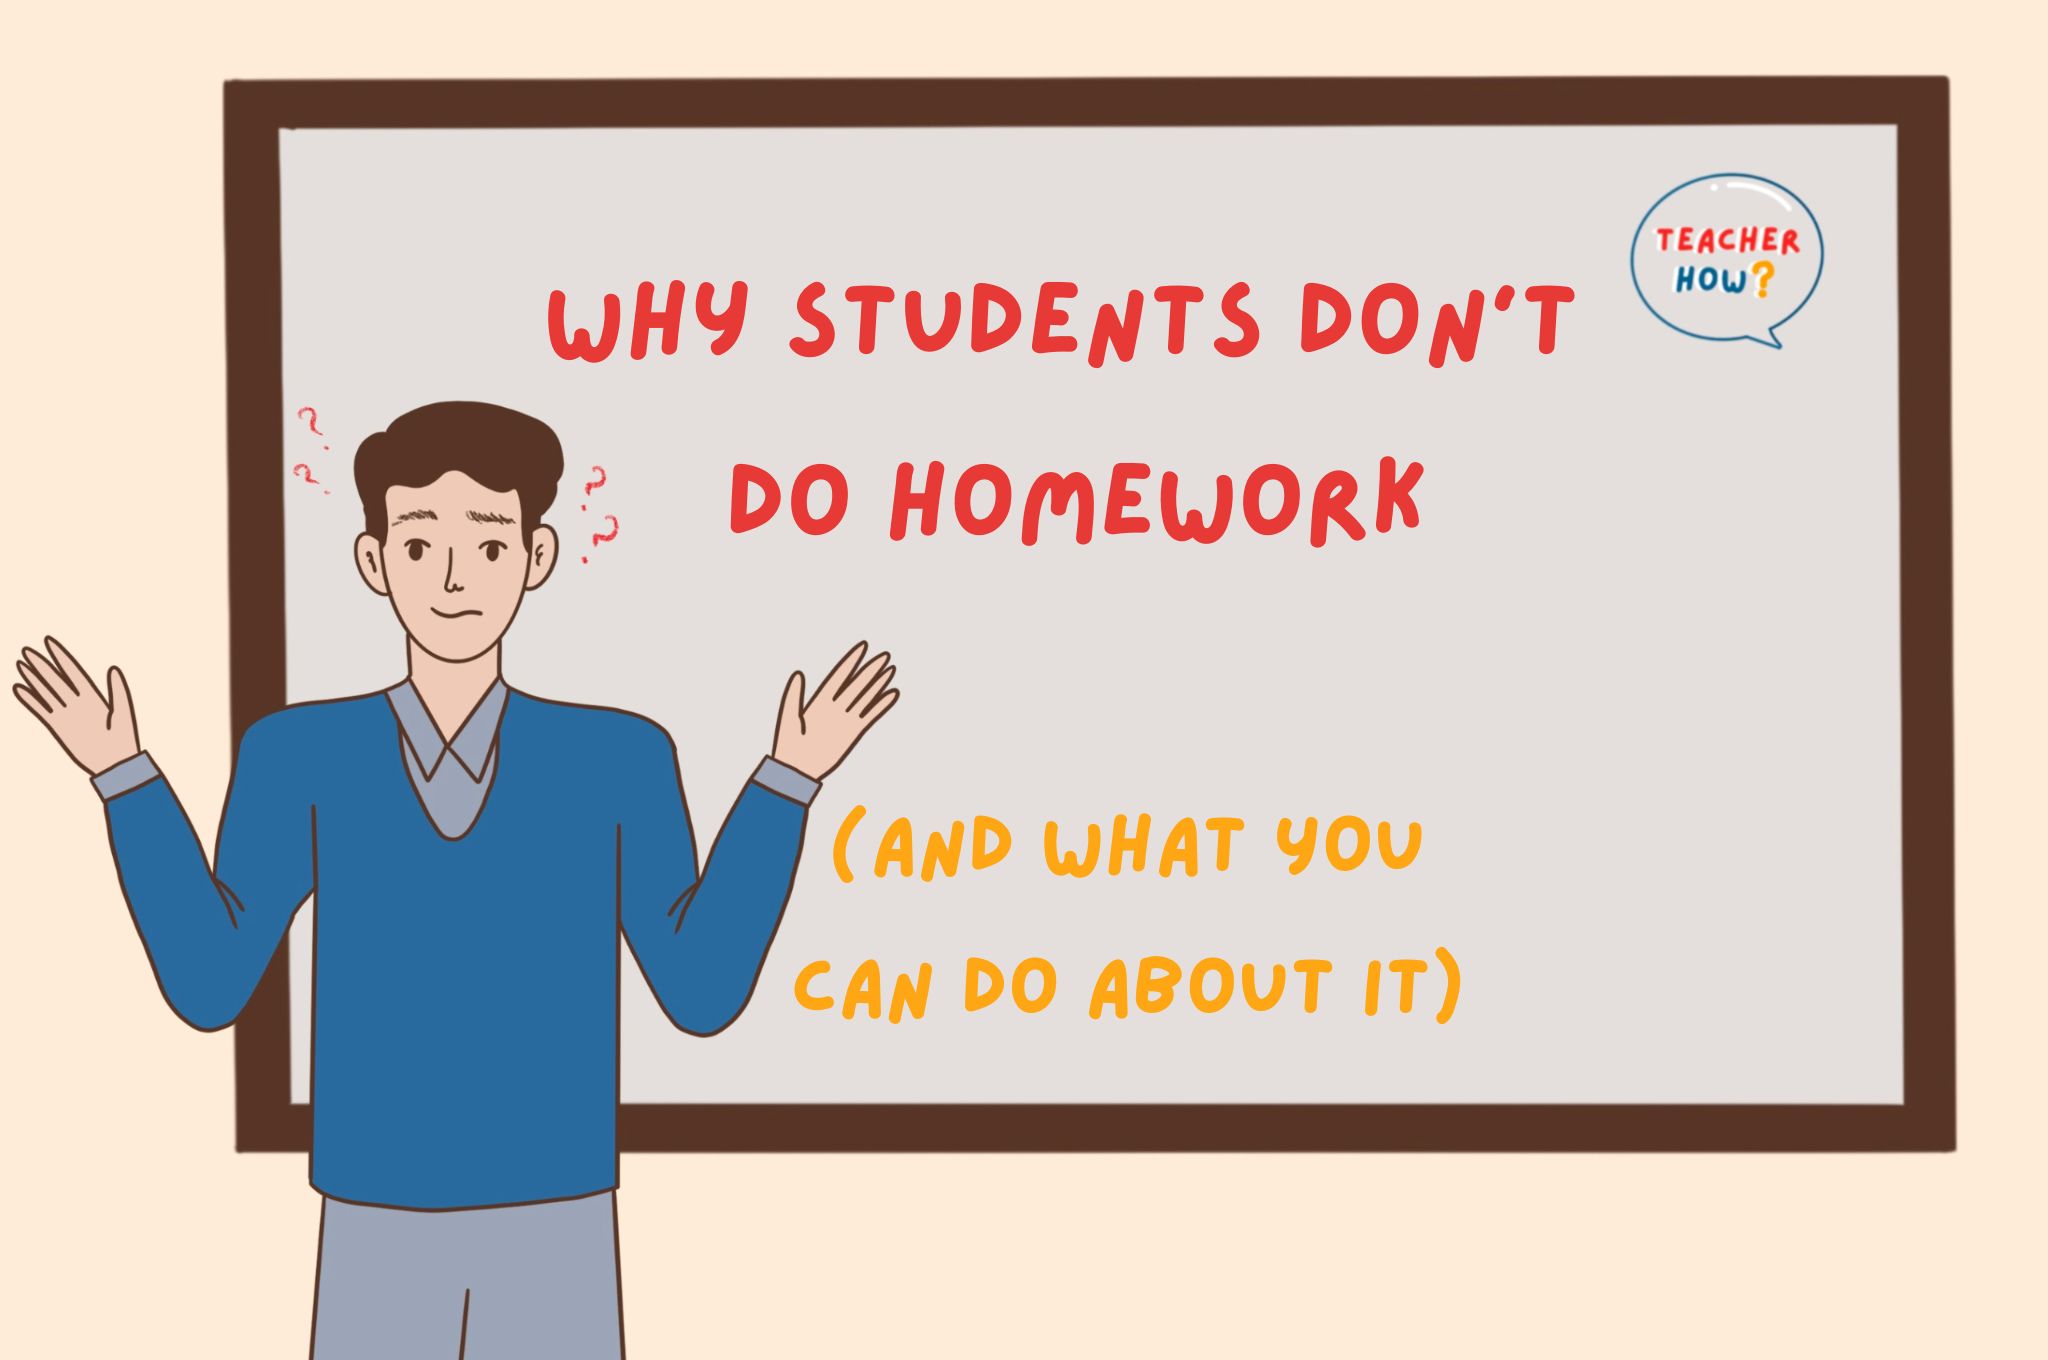 why didn't you do your homework